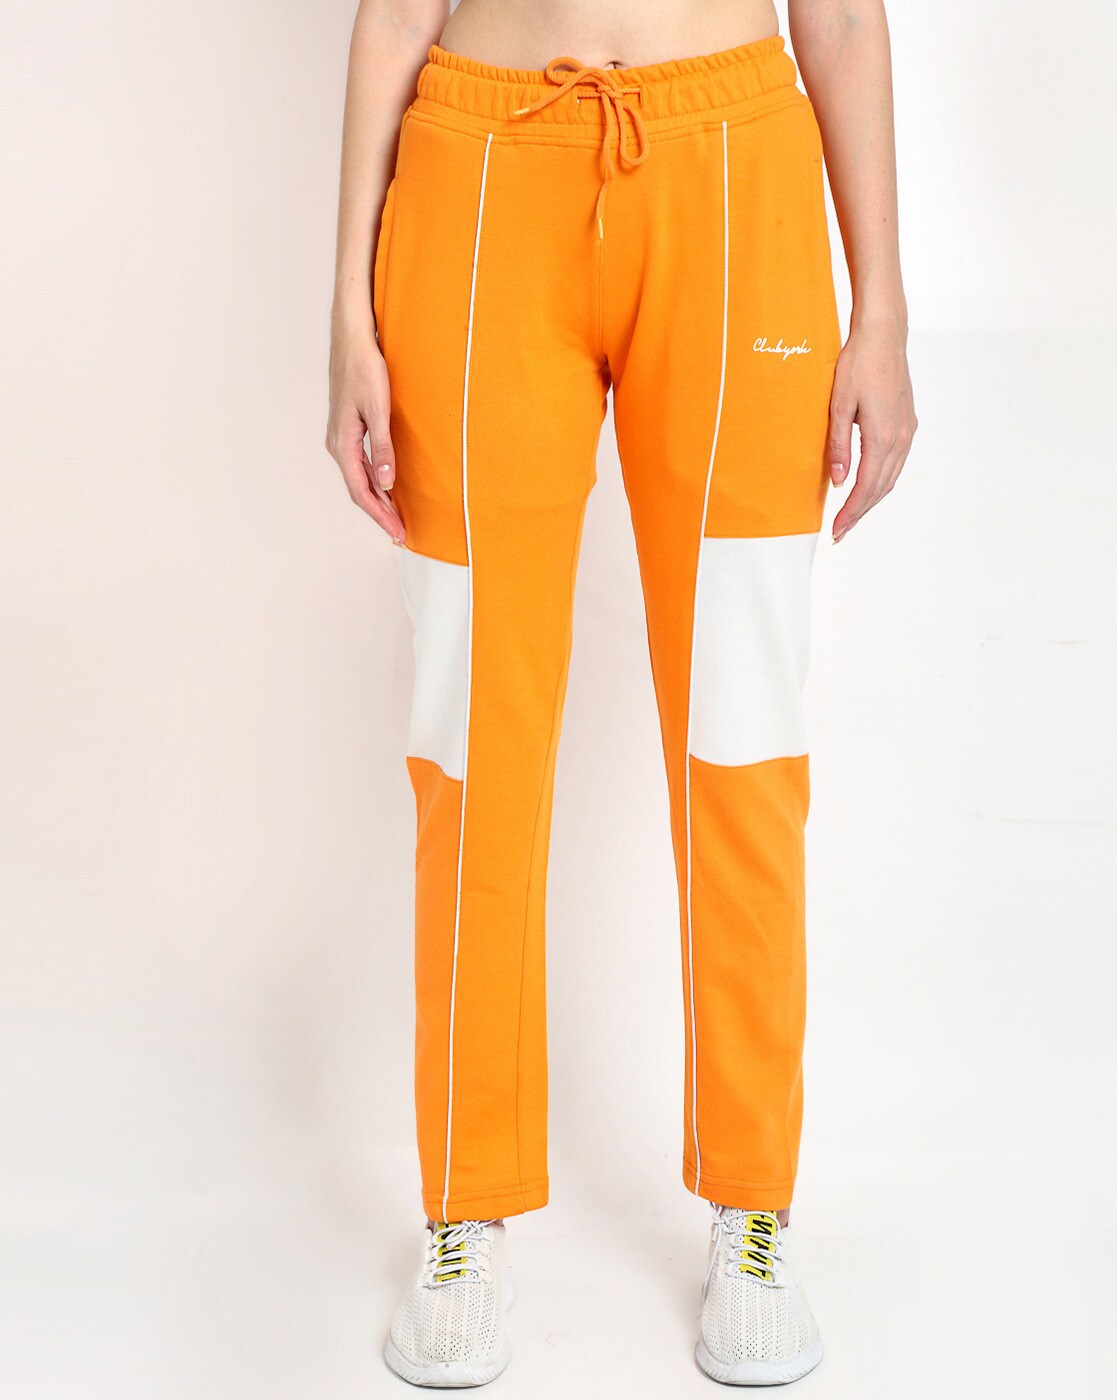 FASHION AND YOUTH Gym Yoga Sports Stretchable Casual Running Workout  Regular Fit Power Printed Neon Orange Track Pants  Latest Fashionable  Stylish Collection Night wear Sweatpant  Amazonin Clothing  Accessories